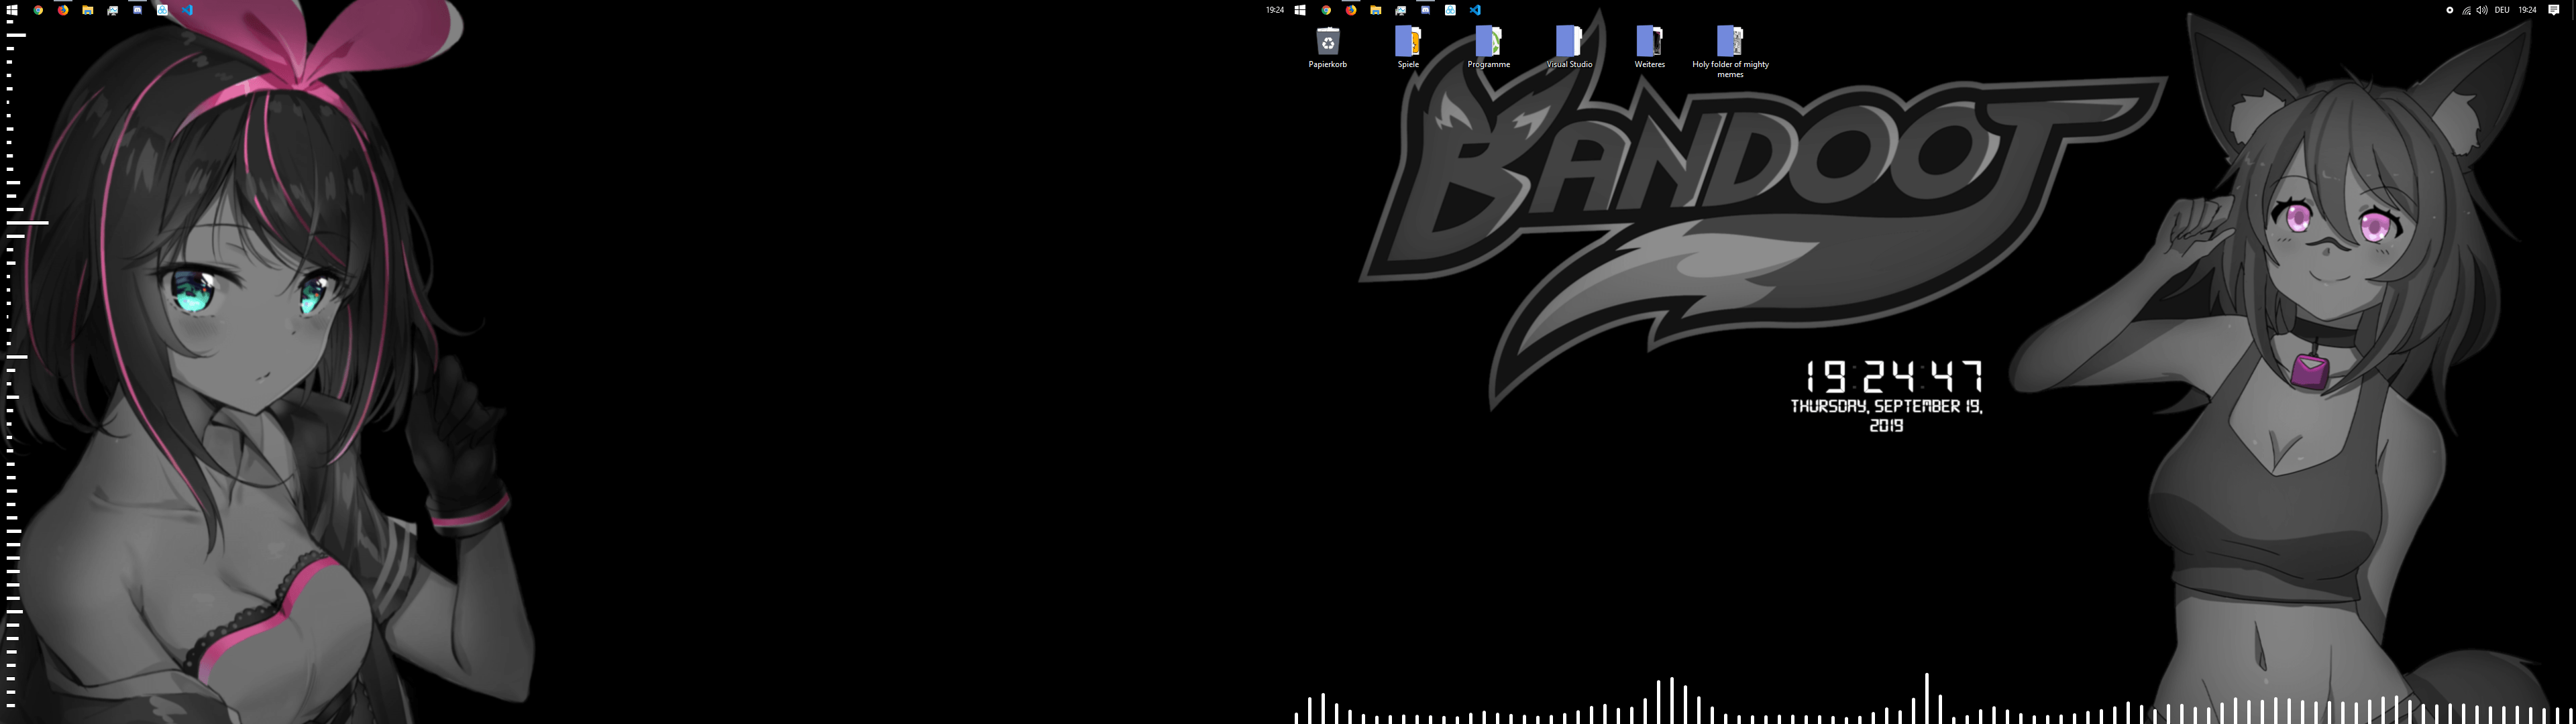 My Desktop feels completed Megalovania Camellia Remix in